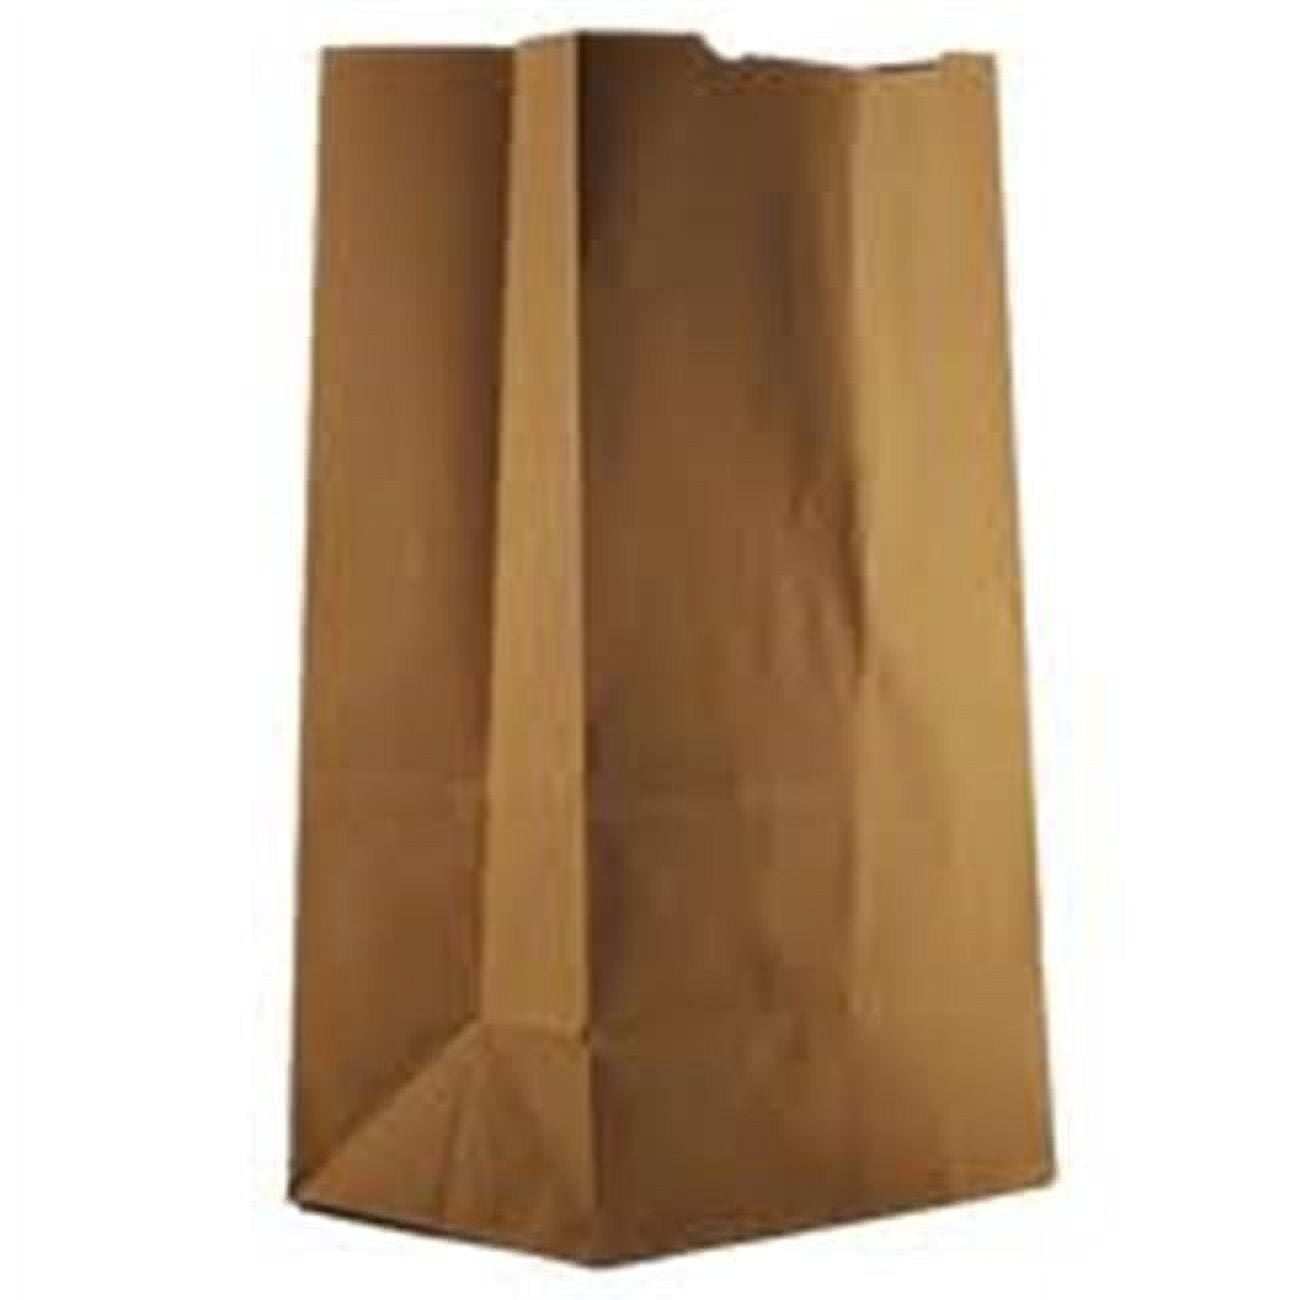 81187 9.75 X 6.25 X 16.25 In. Recycled Paper Bags Kraft - Case Of 500